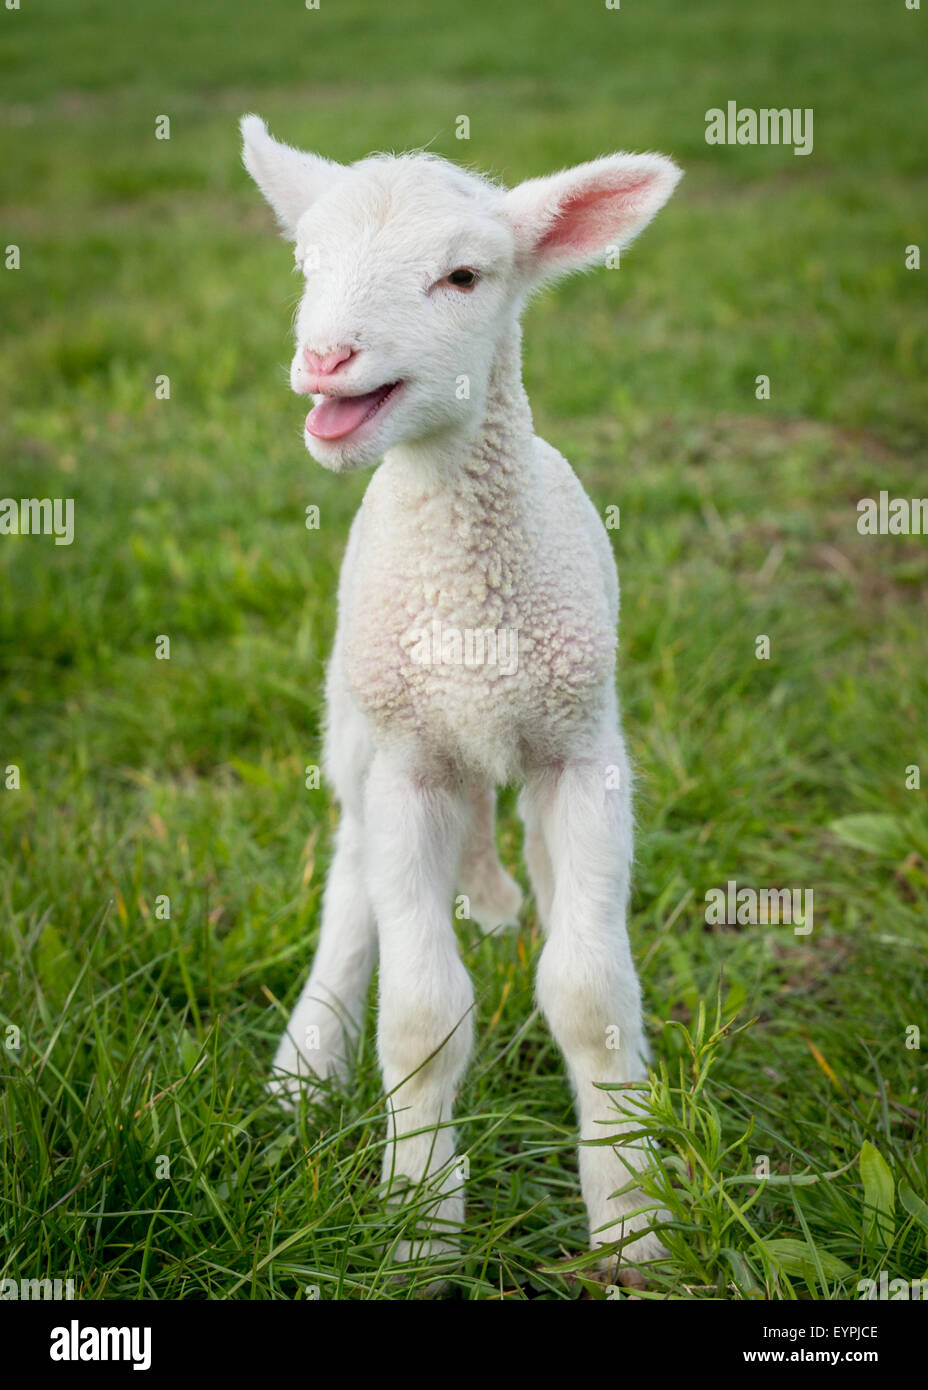 a young white lamb in a field of grass Stock Photo